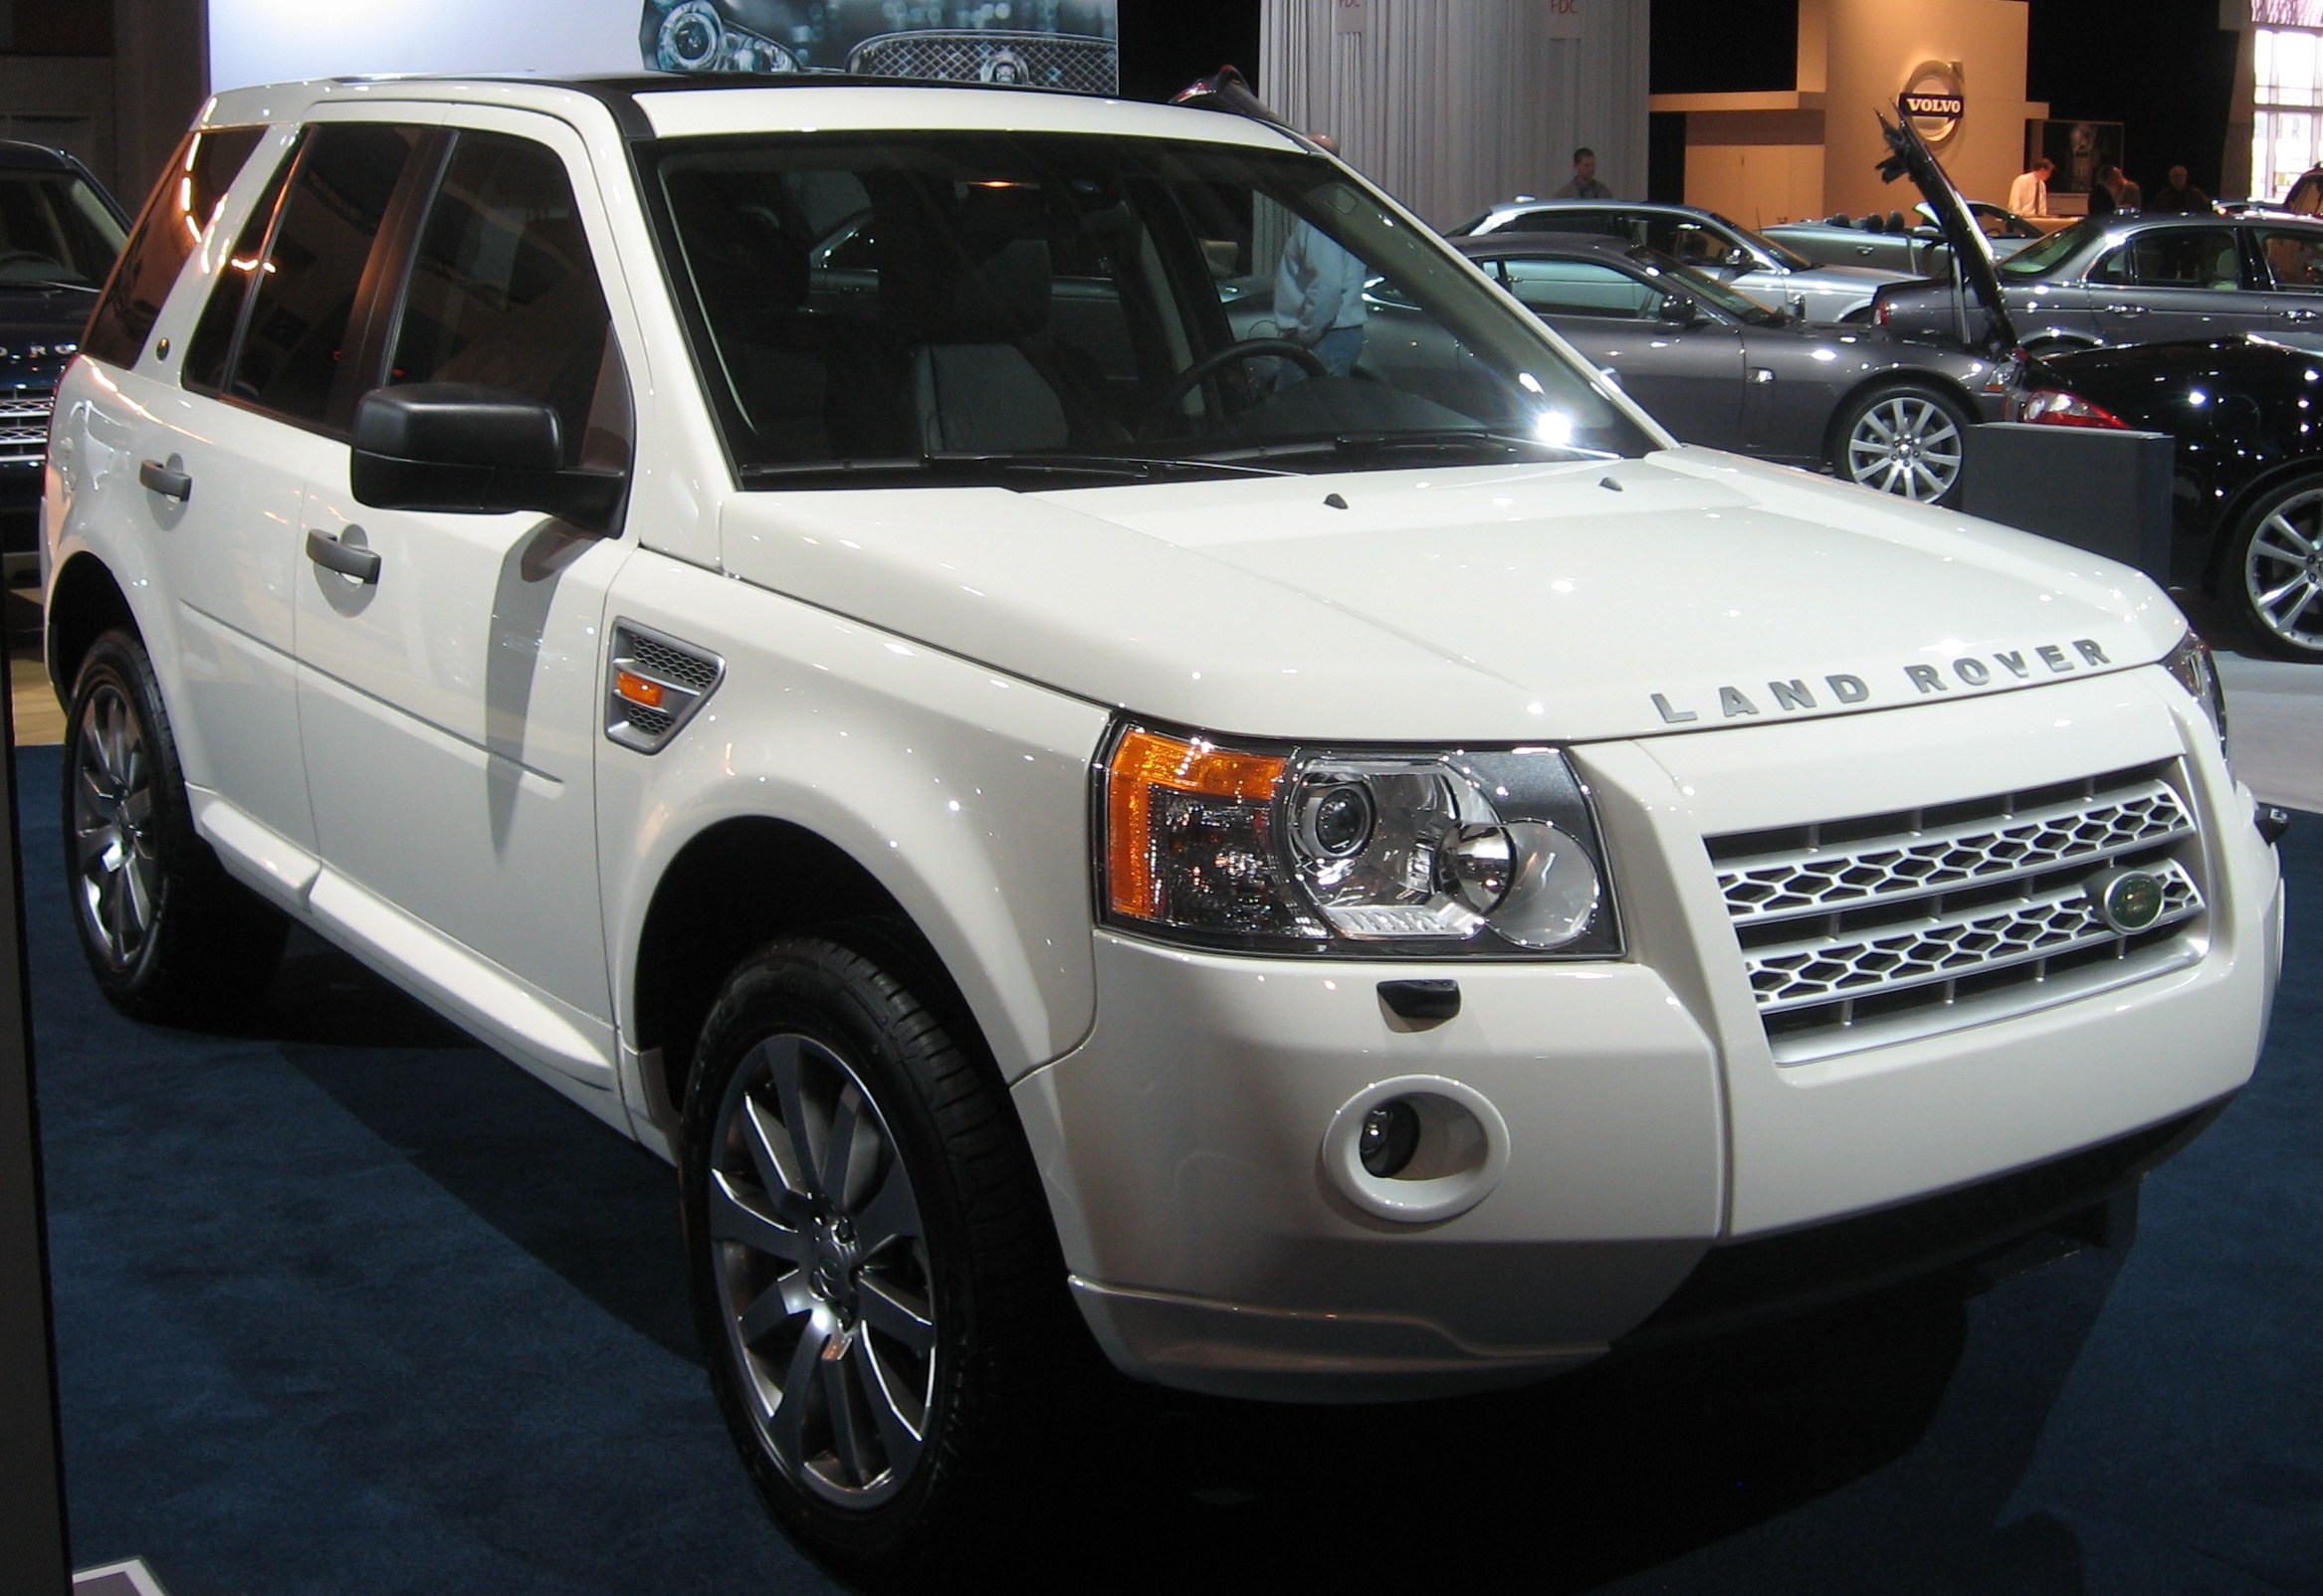 File:2008 Land Rover LR2 DC.JPG - Wikimedia Commons